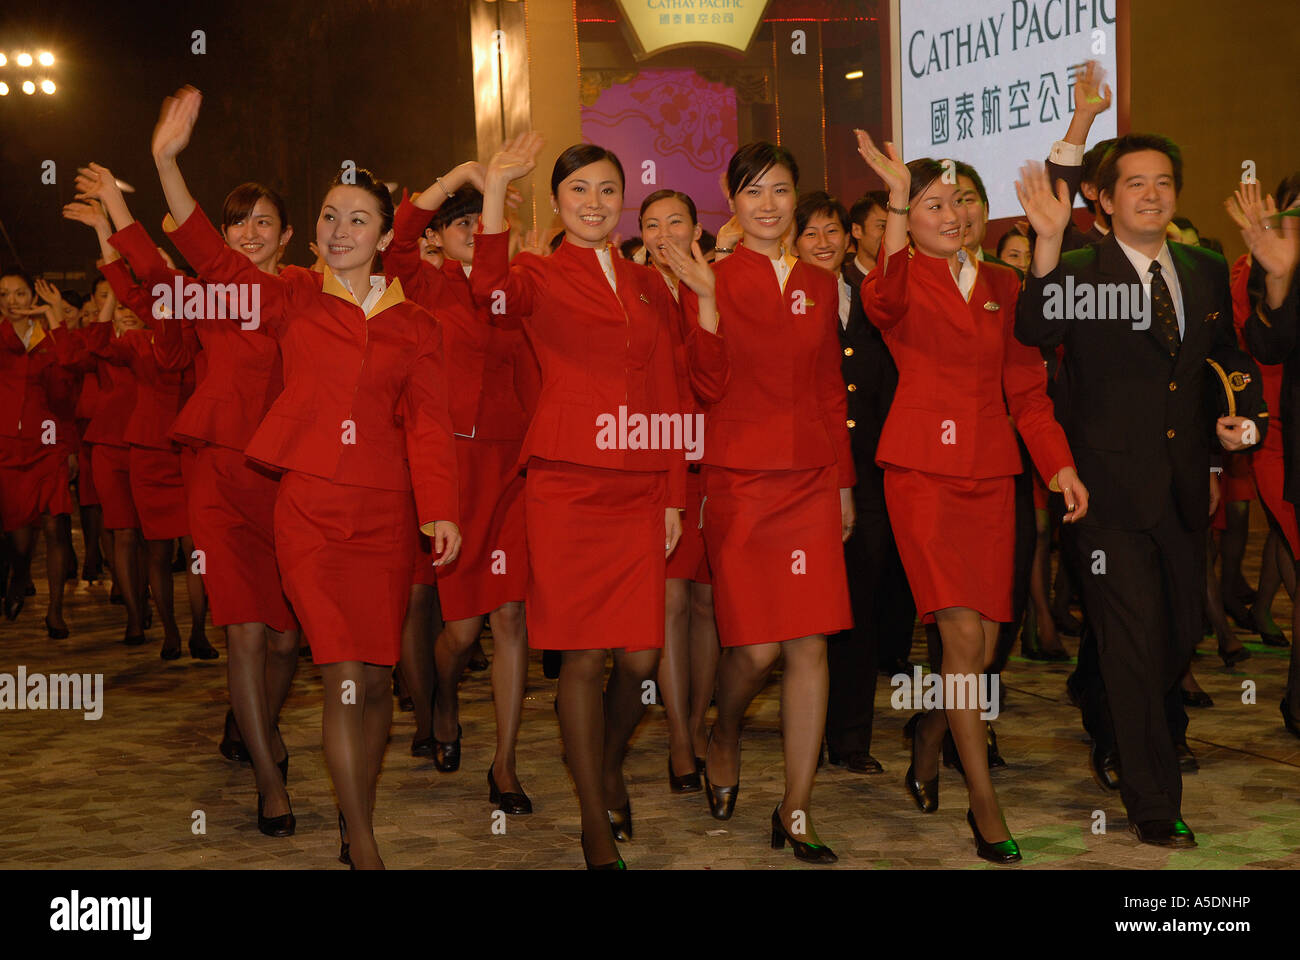 Cathay Pacific flight attendants taking part in the Hong Kong Chinese New Year Parade in China Stock Photo